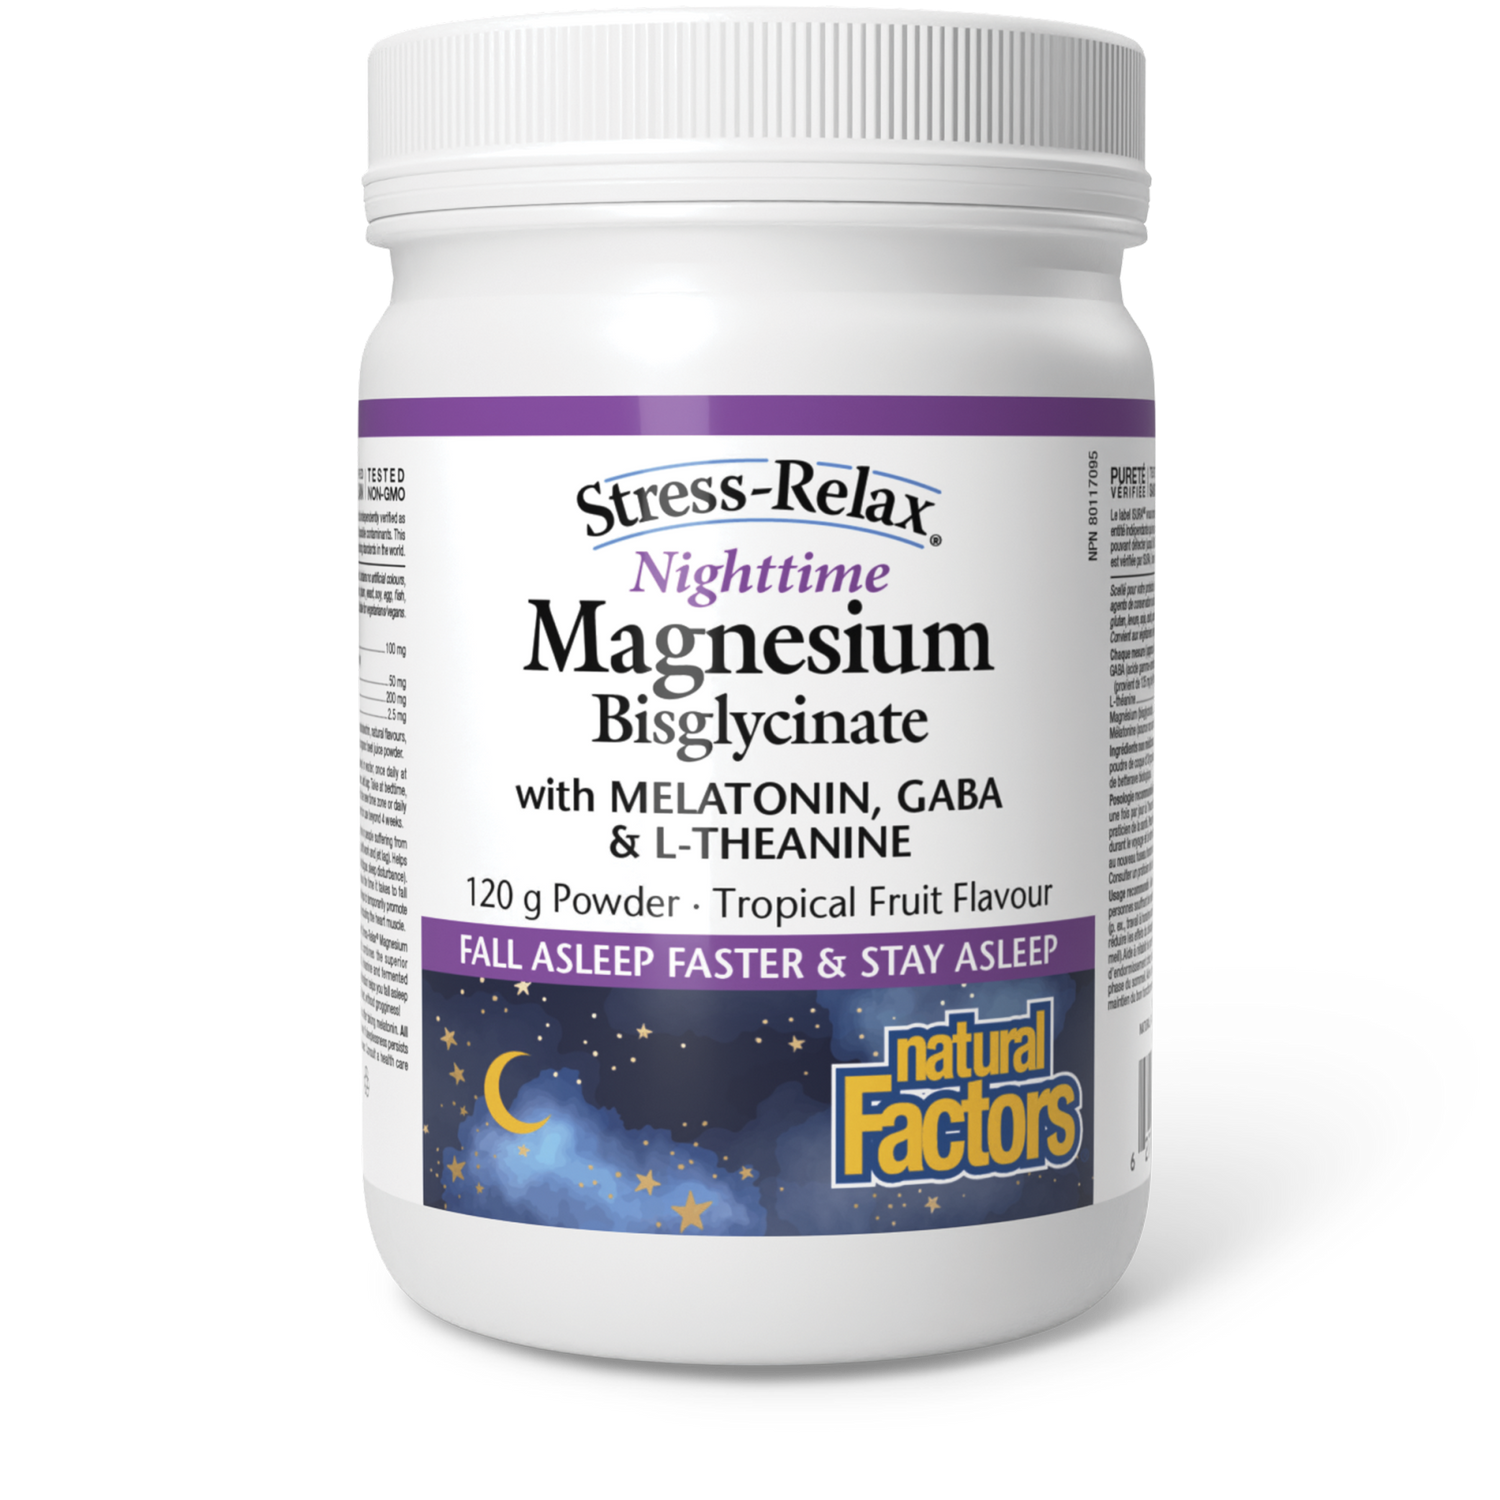 Nighttime Magnesium Bisglycinate Stress Relax, Natural Factors|v|image|3528